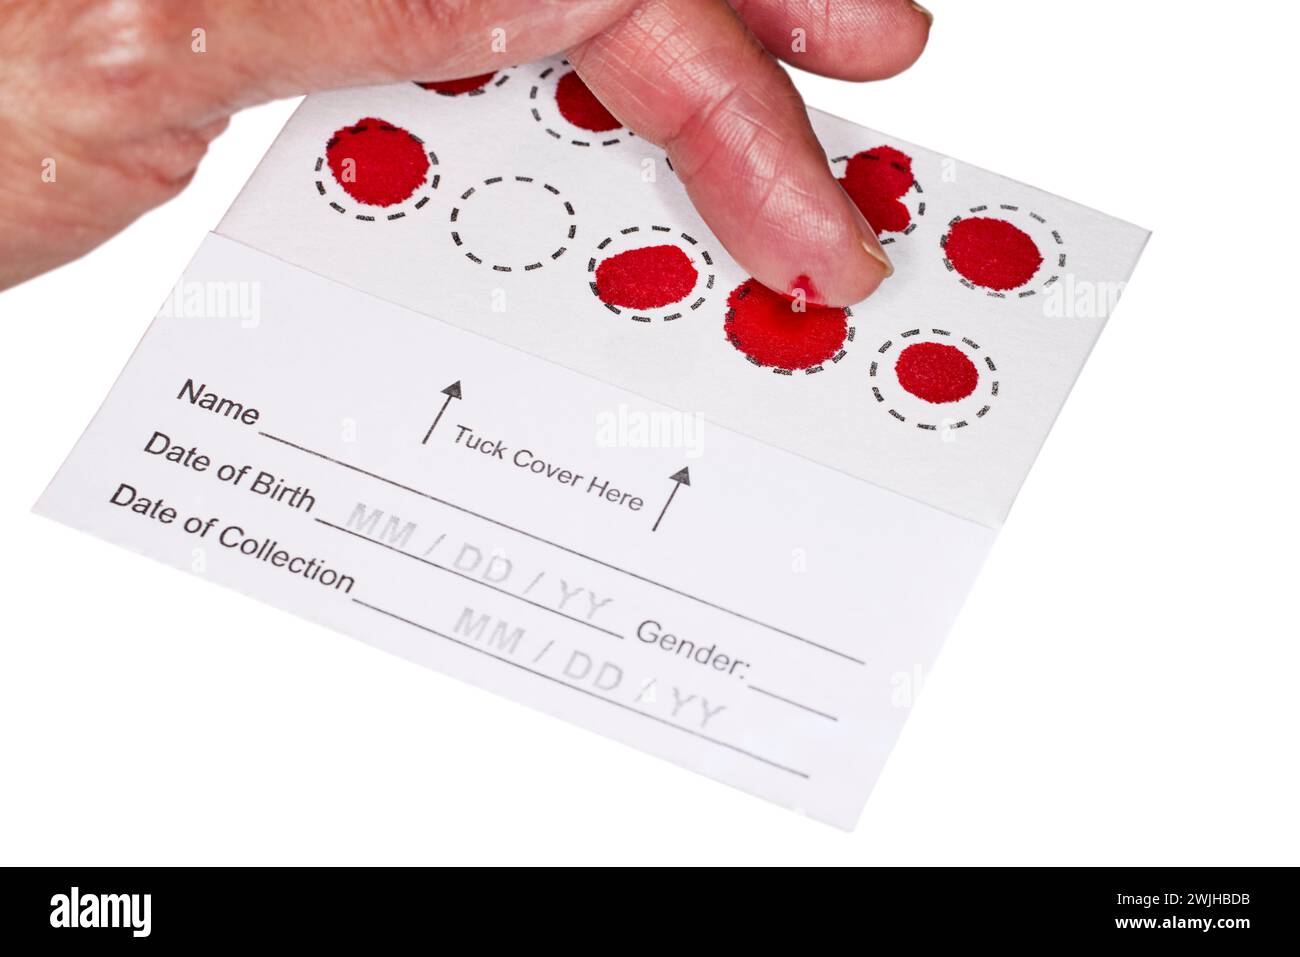 Blood Spot test card with droplets of blood for hormone testing Stock Photo